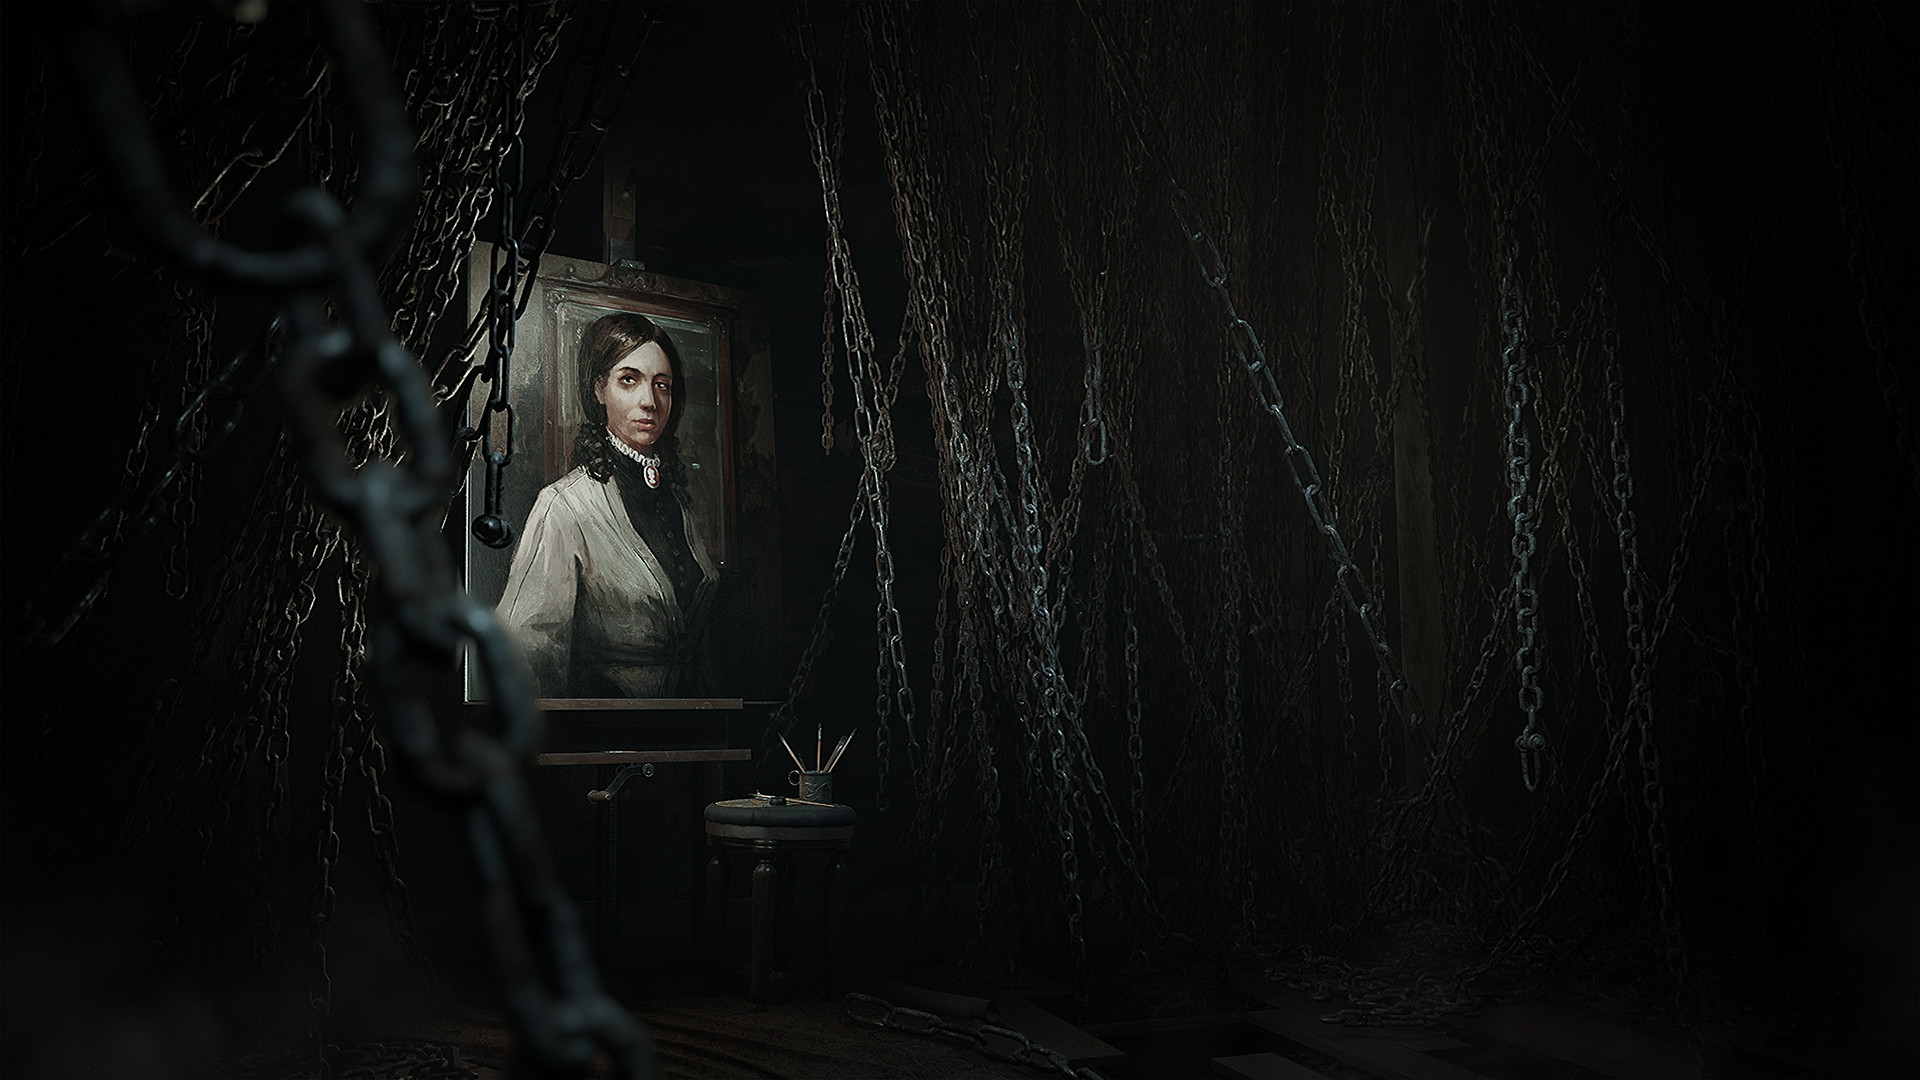 Psychological horror Layers Of Fear 2 is out now on Steam